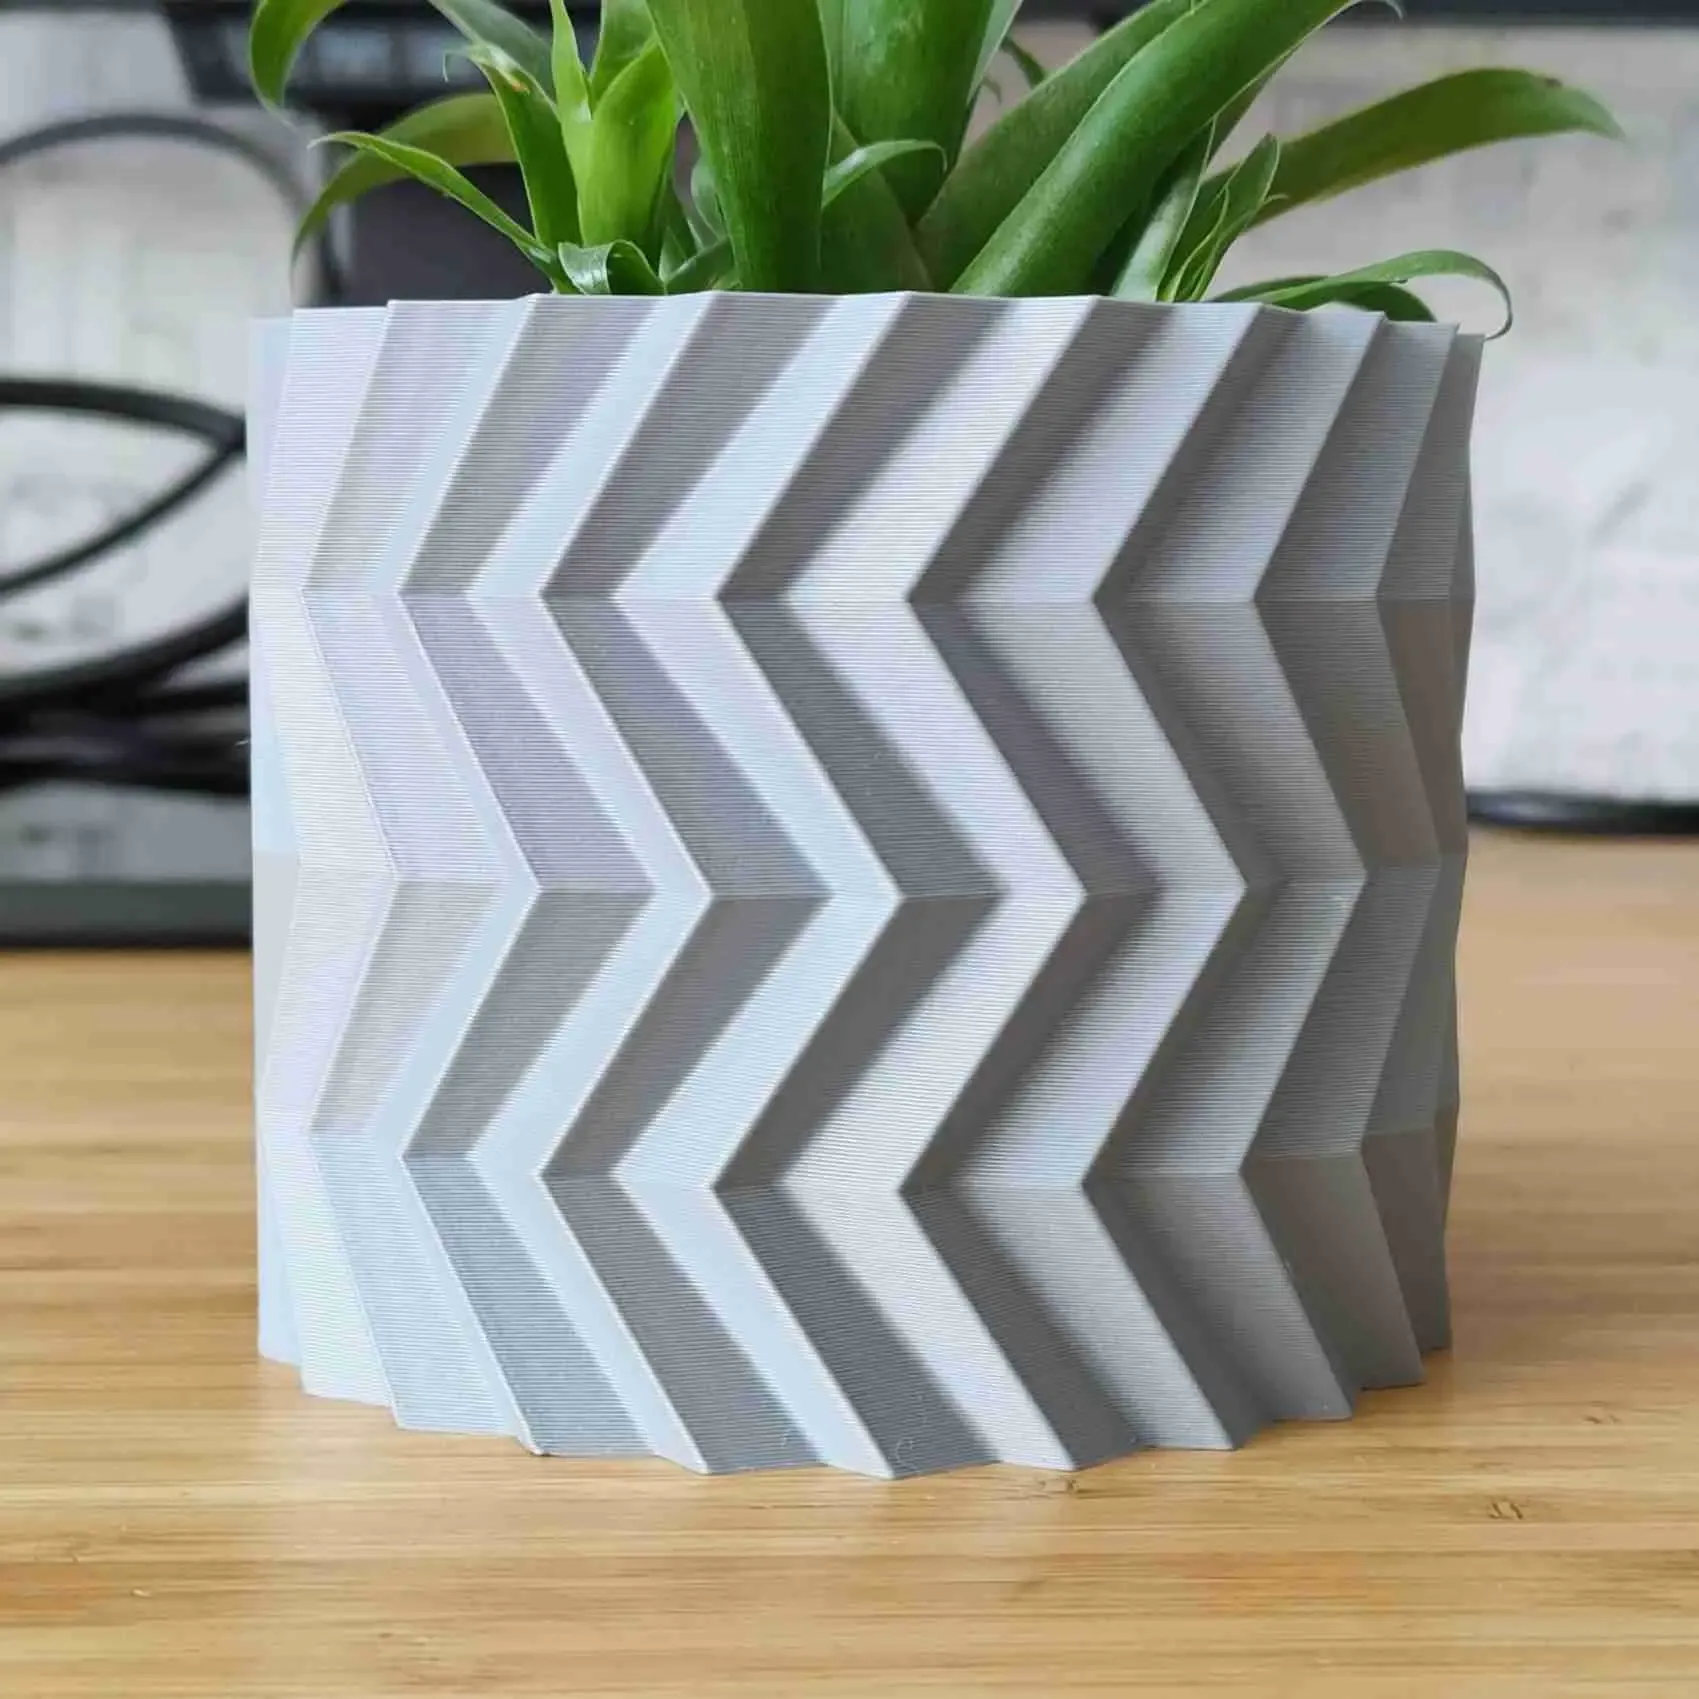 ZigZag - Pot and Planter for house plants - Vase mode